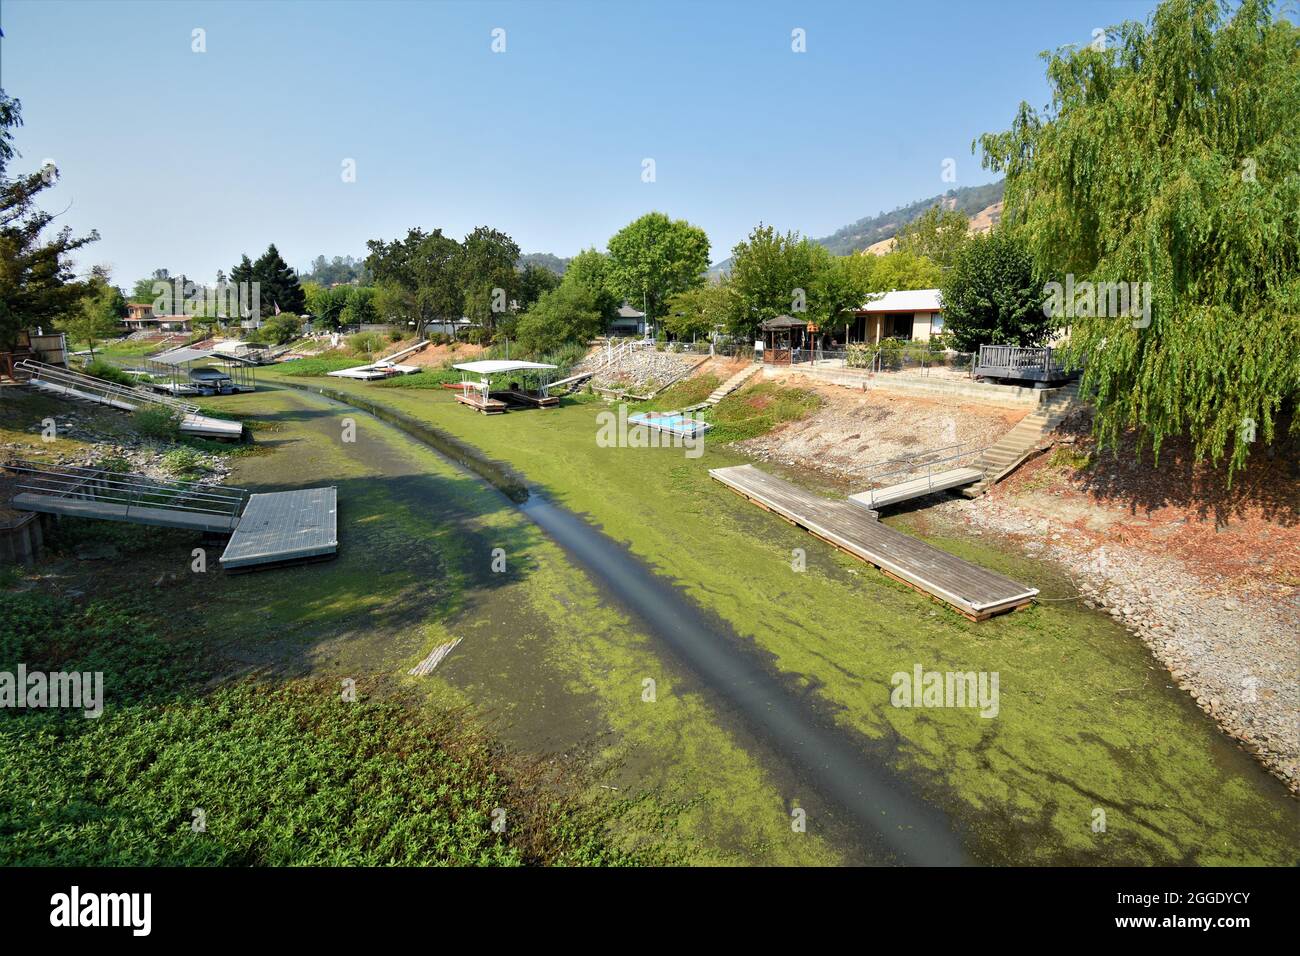 Drought effects in northern California where canal and channel are low or no water and boats are useless & stranded at the docks behind owners  homes Stock Photo